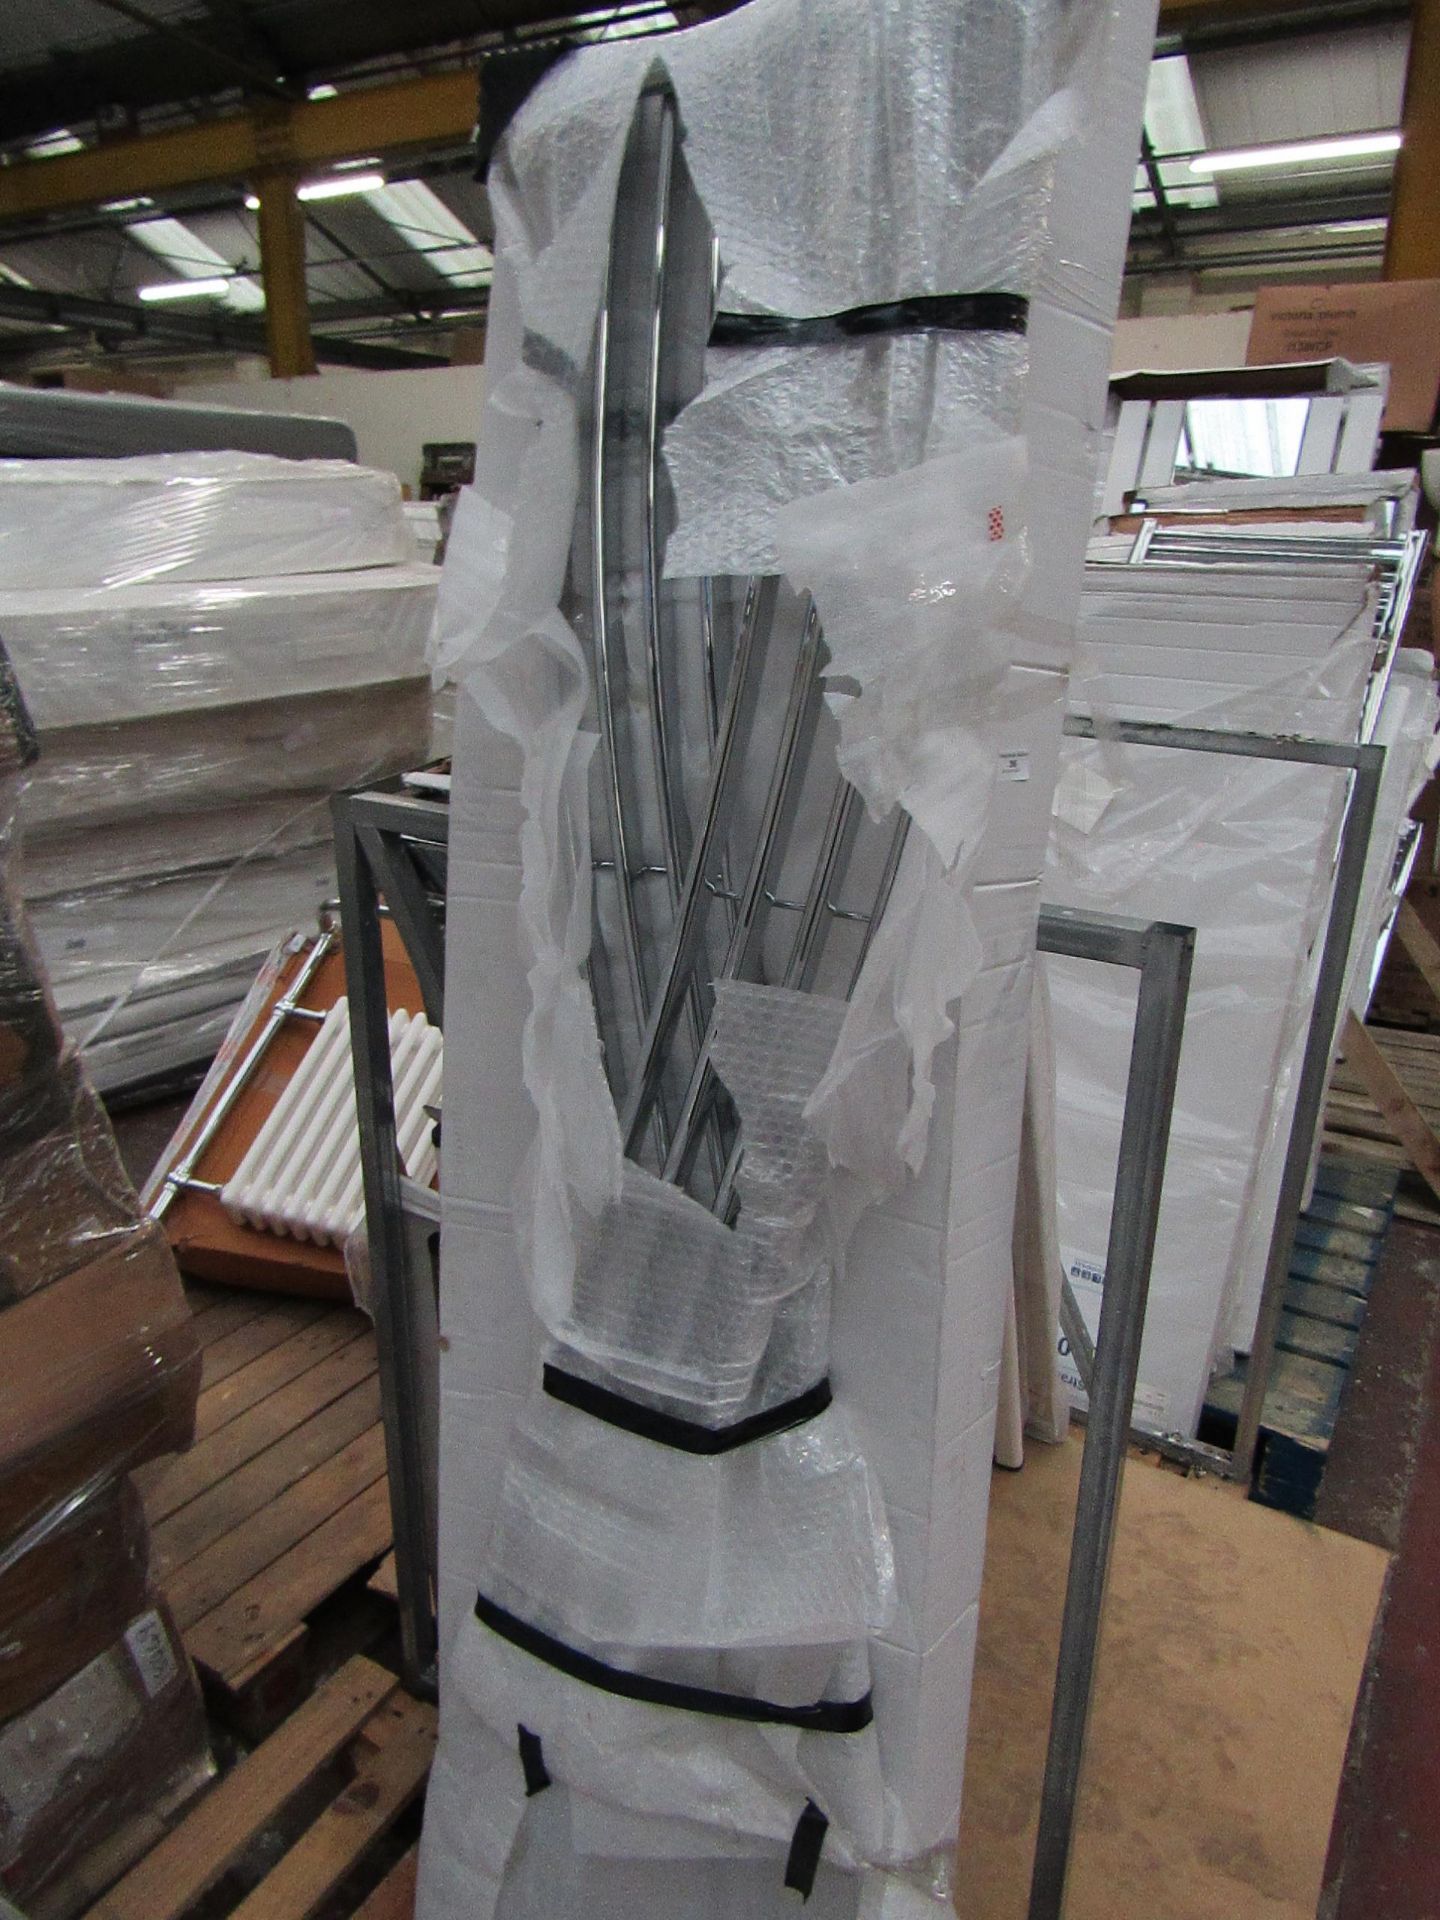 Loco straight towel radiator 1800 x 500, ex-display and boxed. Please note, this lot may contain